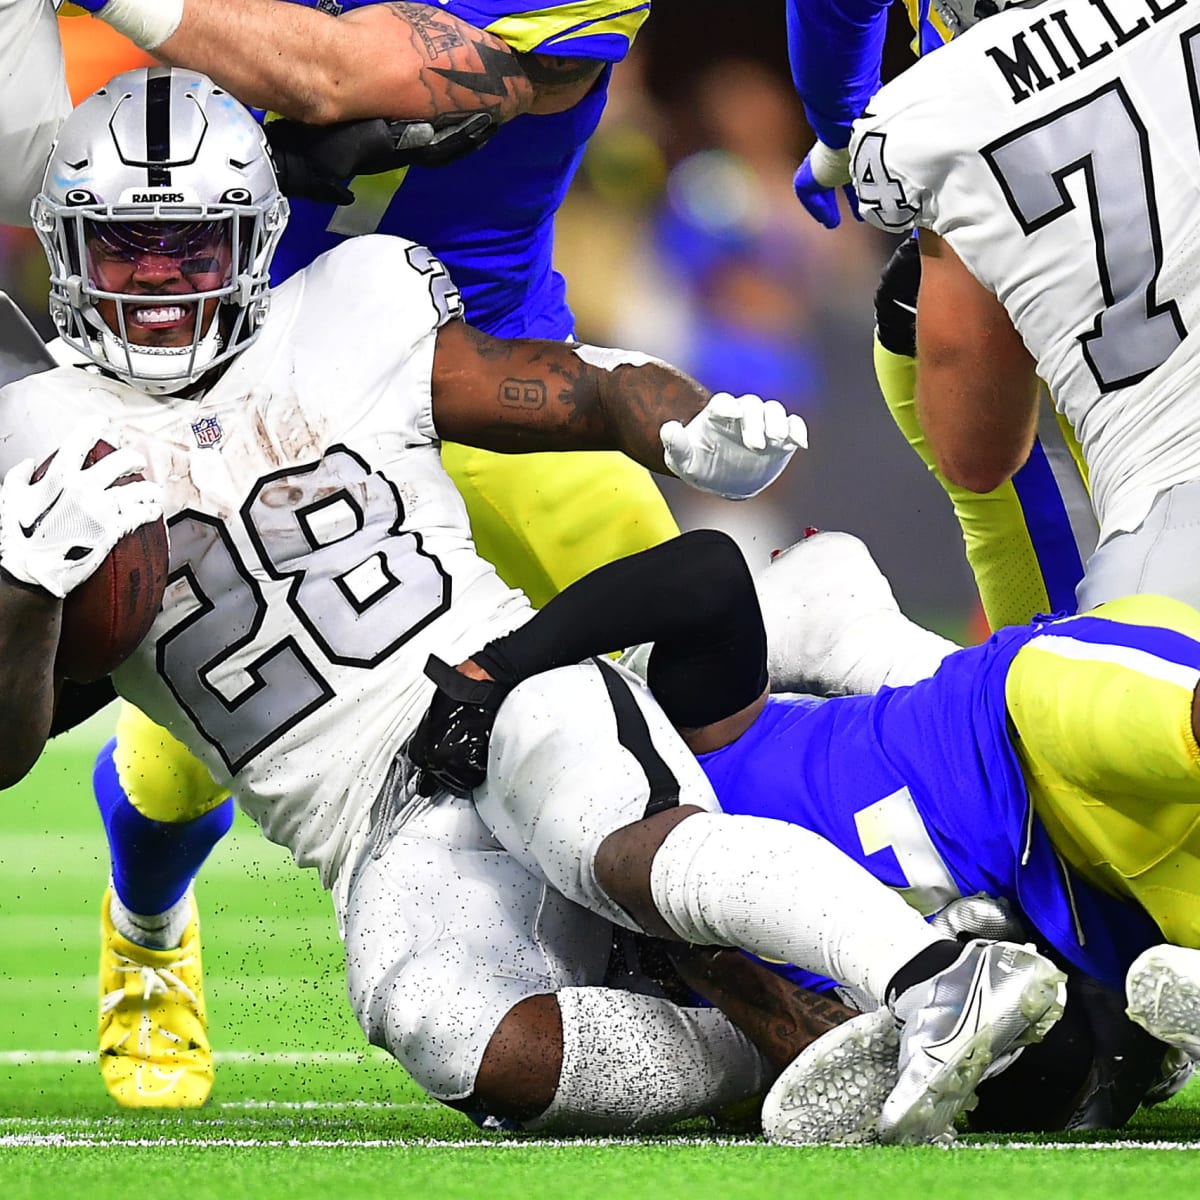 Raiders achieving a feat no one thought possible - A to Z Sports